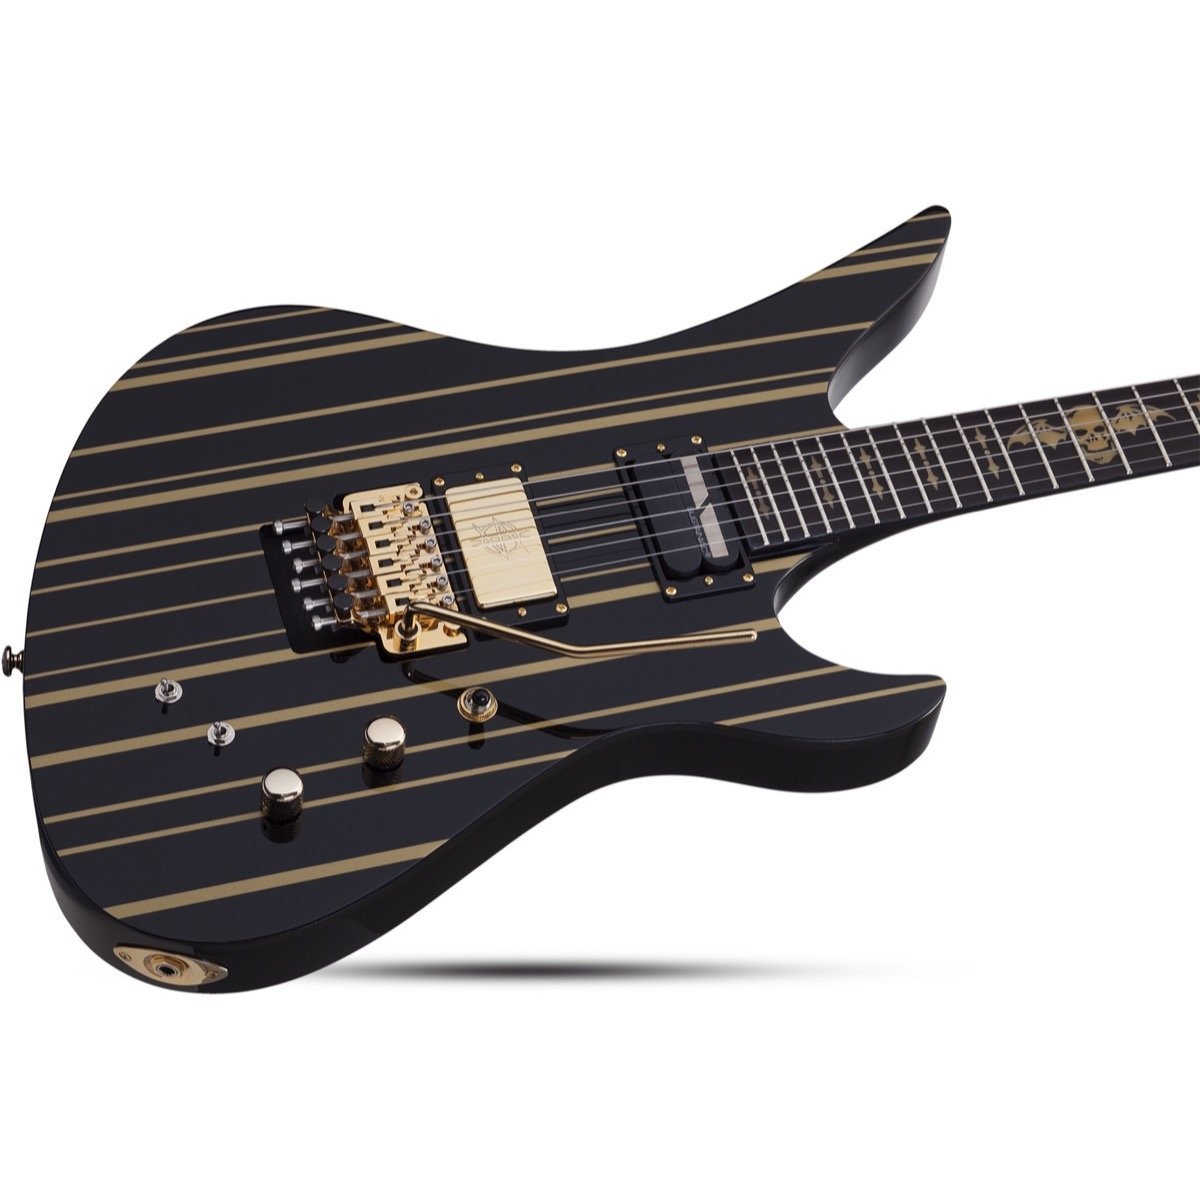 Schecter Synyster Custom S Electric Guitar, Black Gold Stripes